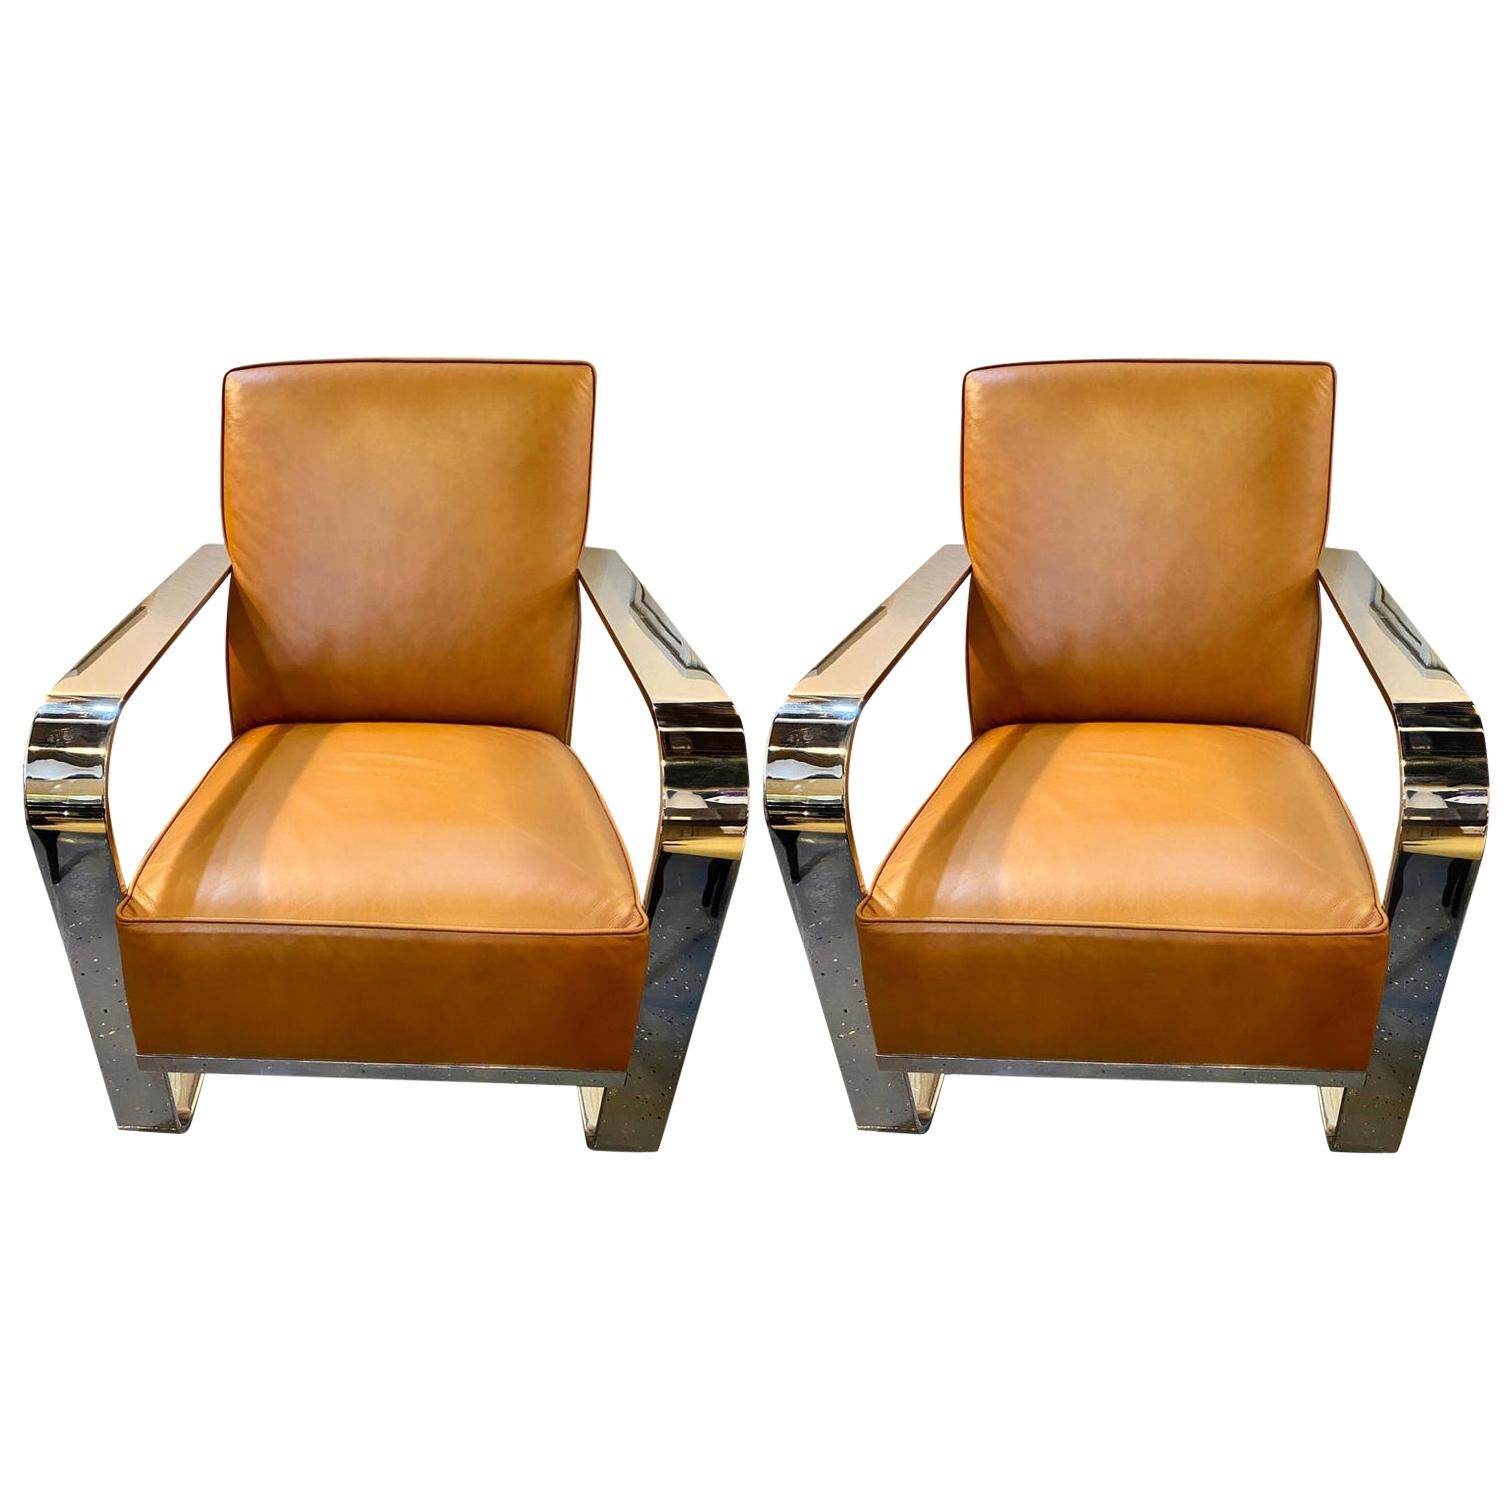 Bohemian Leather Chairs, Chrome and Leather Rockers, a Pair Labeled Ralph Lauren